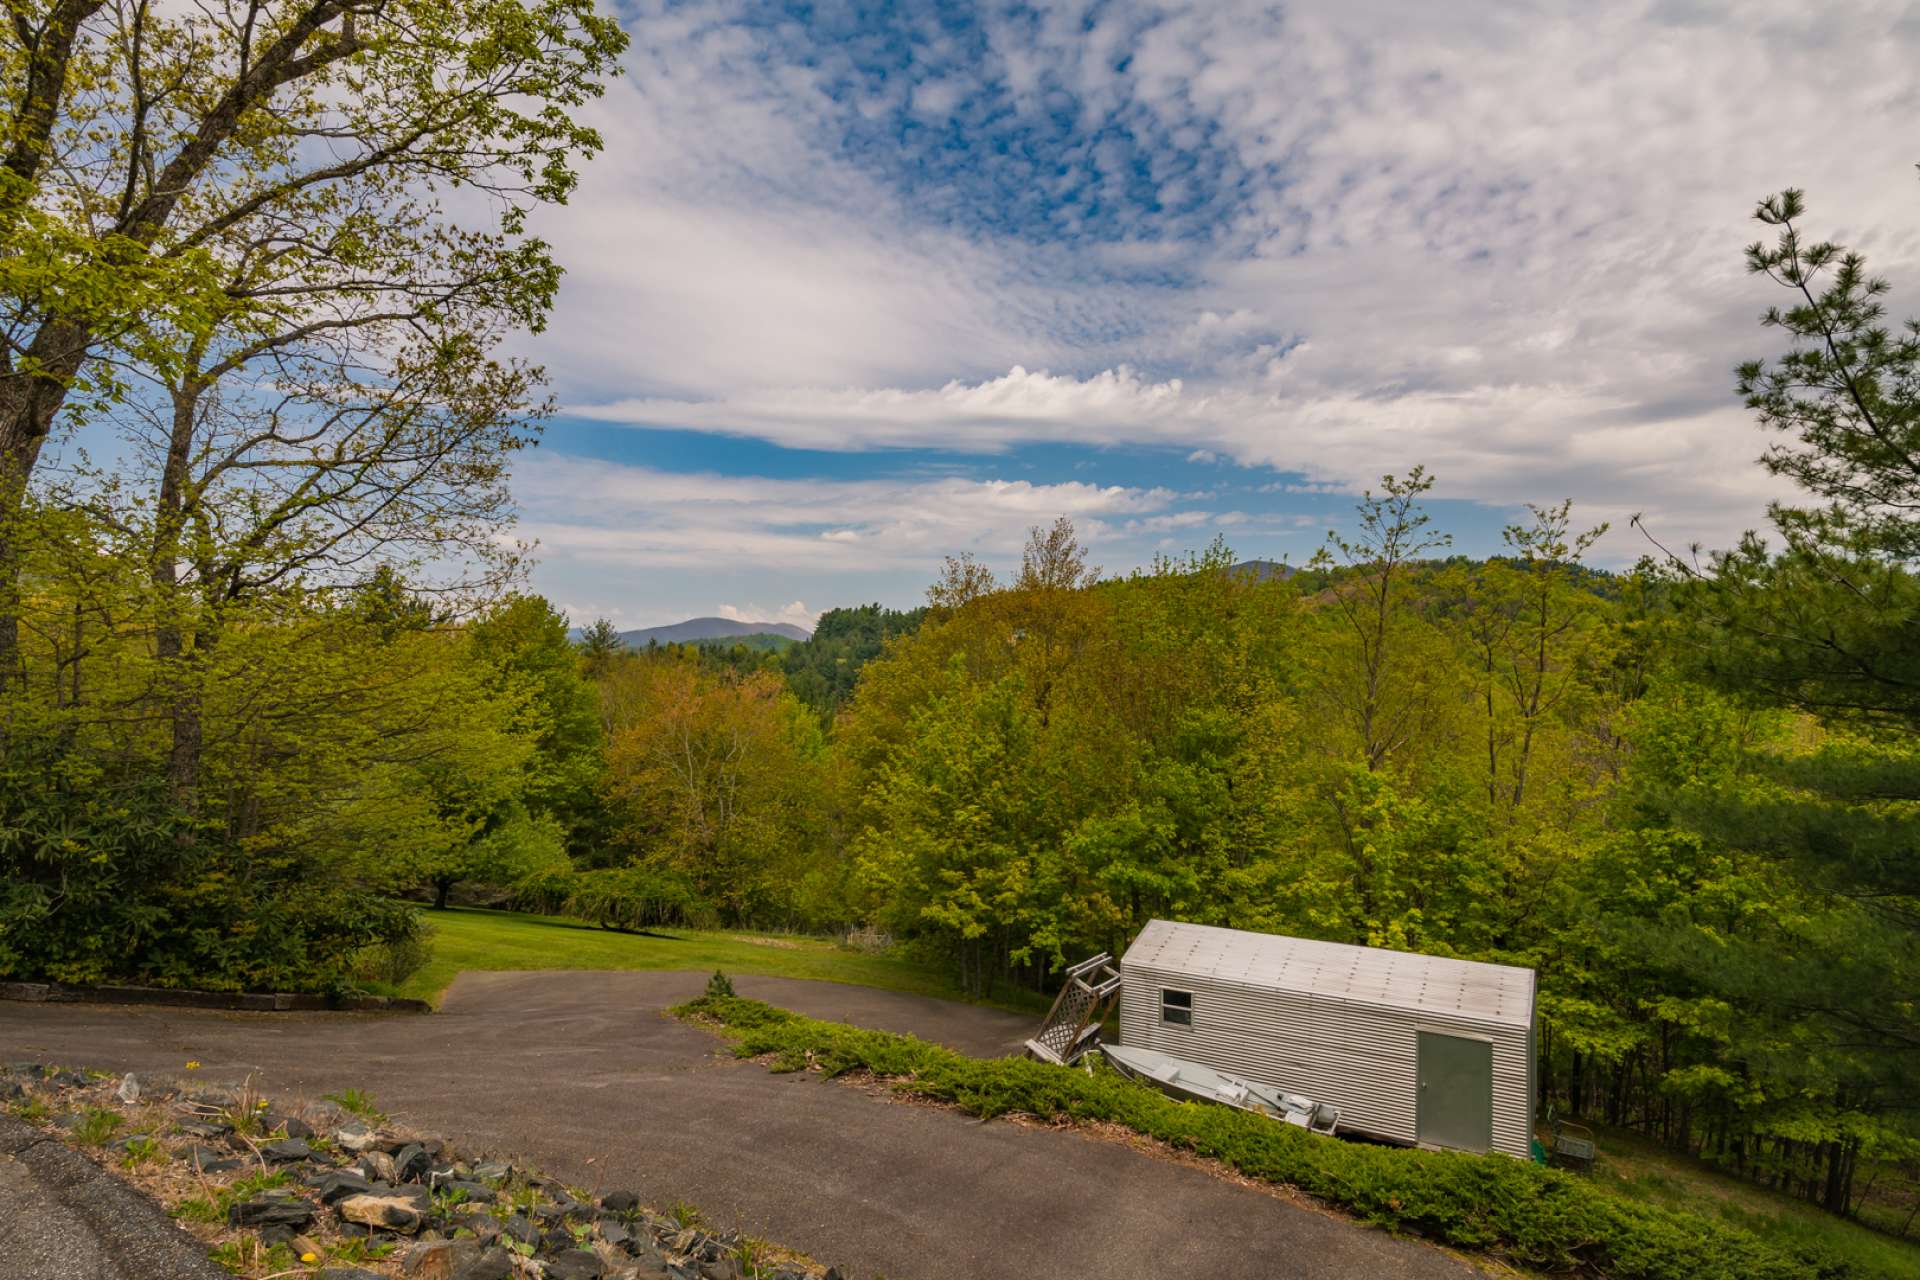 Relax with the mountain views and enjoy mountain living while being just a short drive into town, the New River, Blue Ridge Parkway and many other NC High Country destinations.